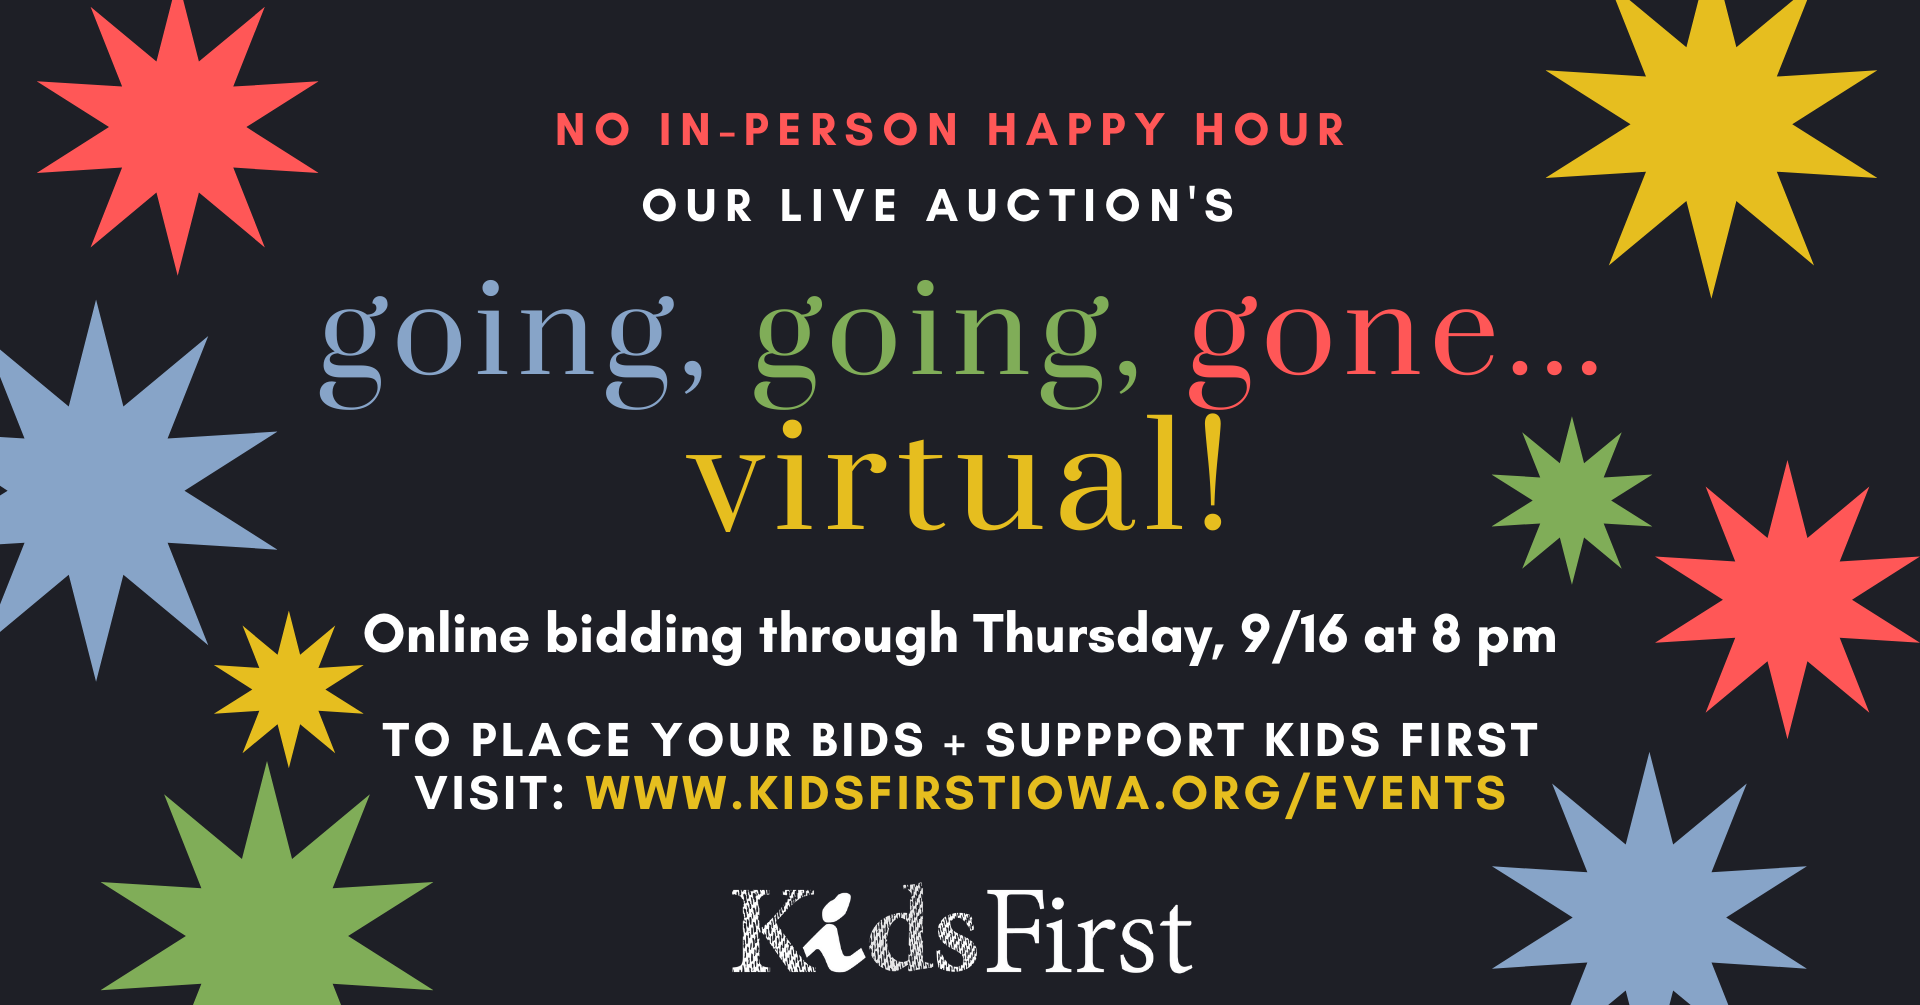 Kids First's Live Auction's Going Virtual